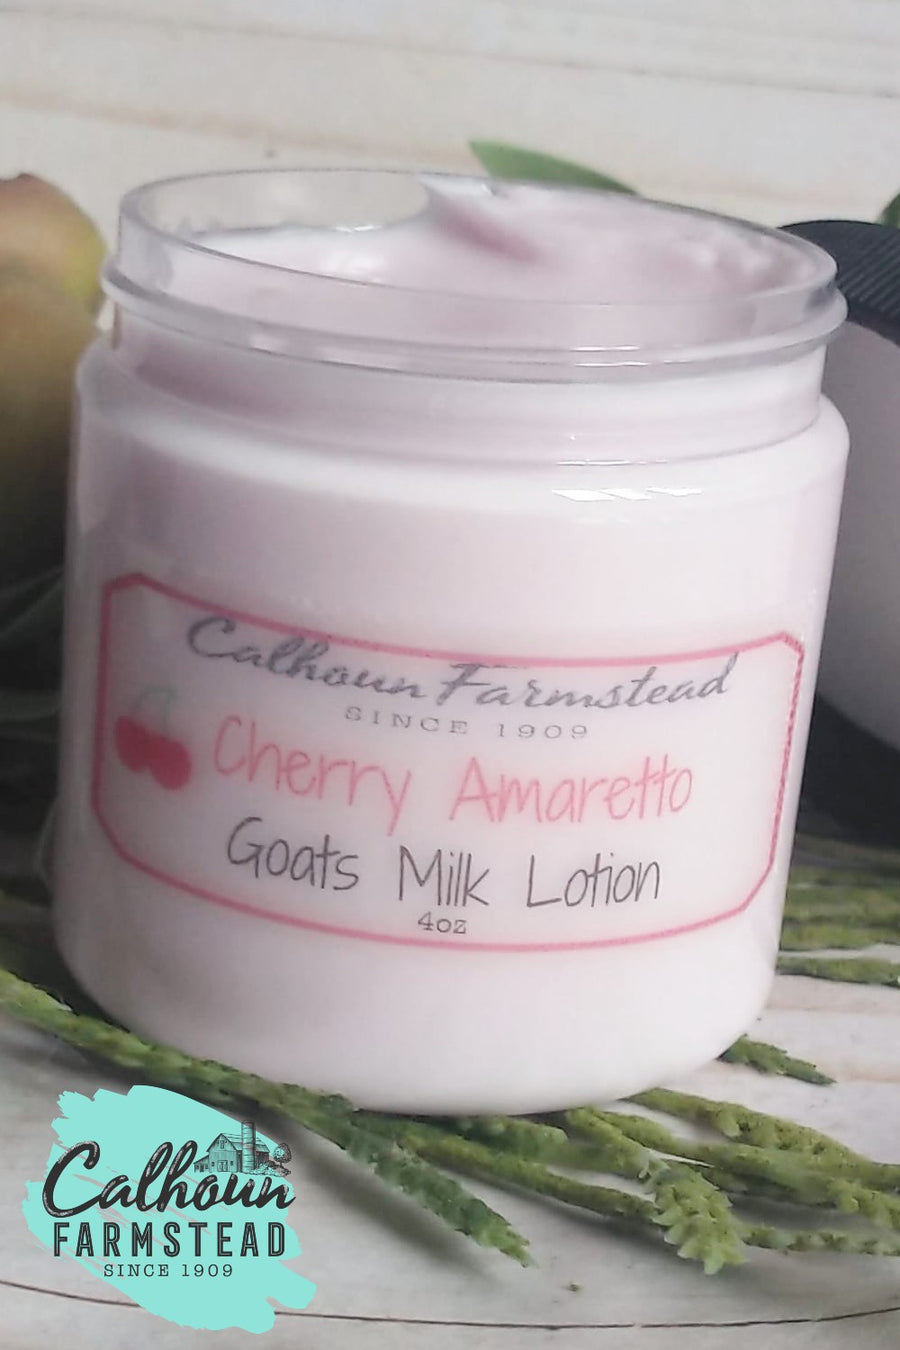 Cherry amaretto scented goats milk lotion. Made of natural ingredients by Calhoun Farm and Market.